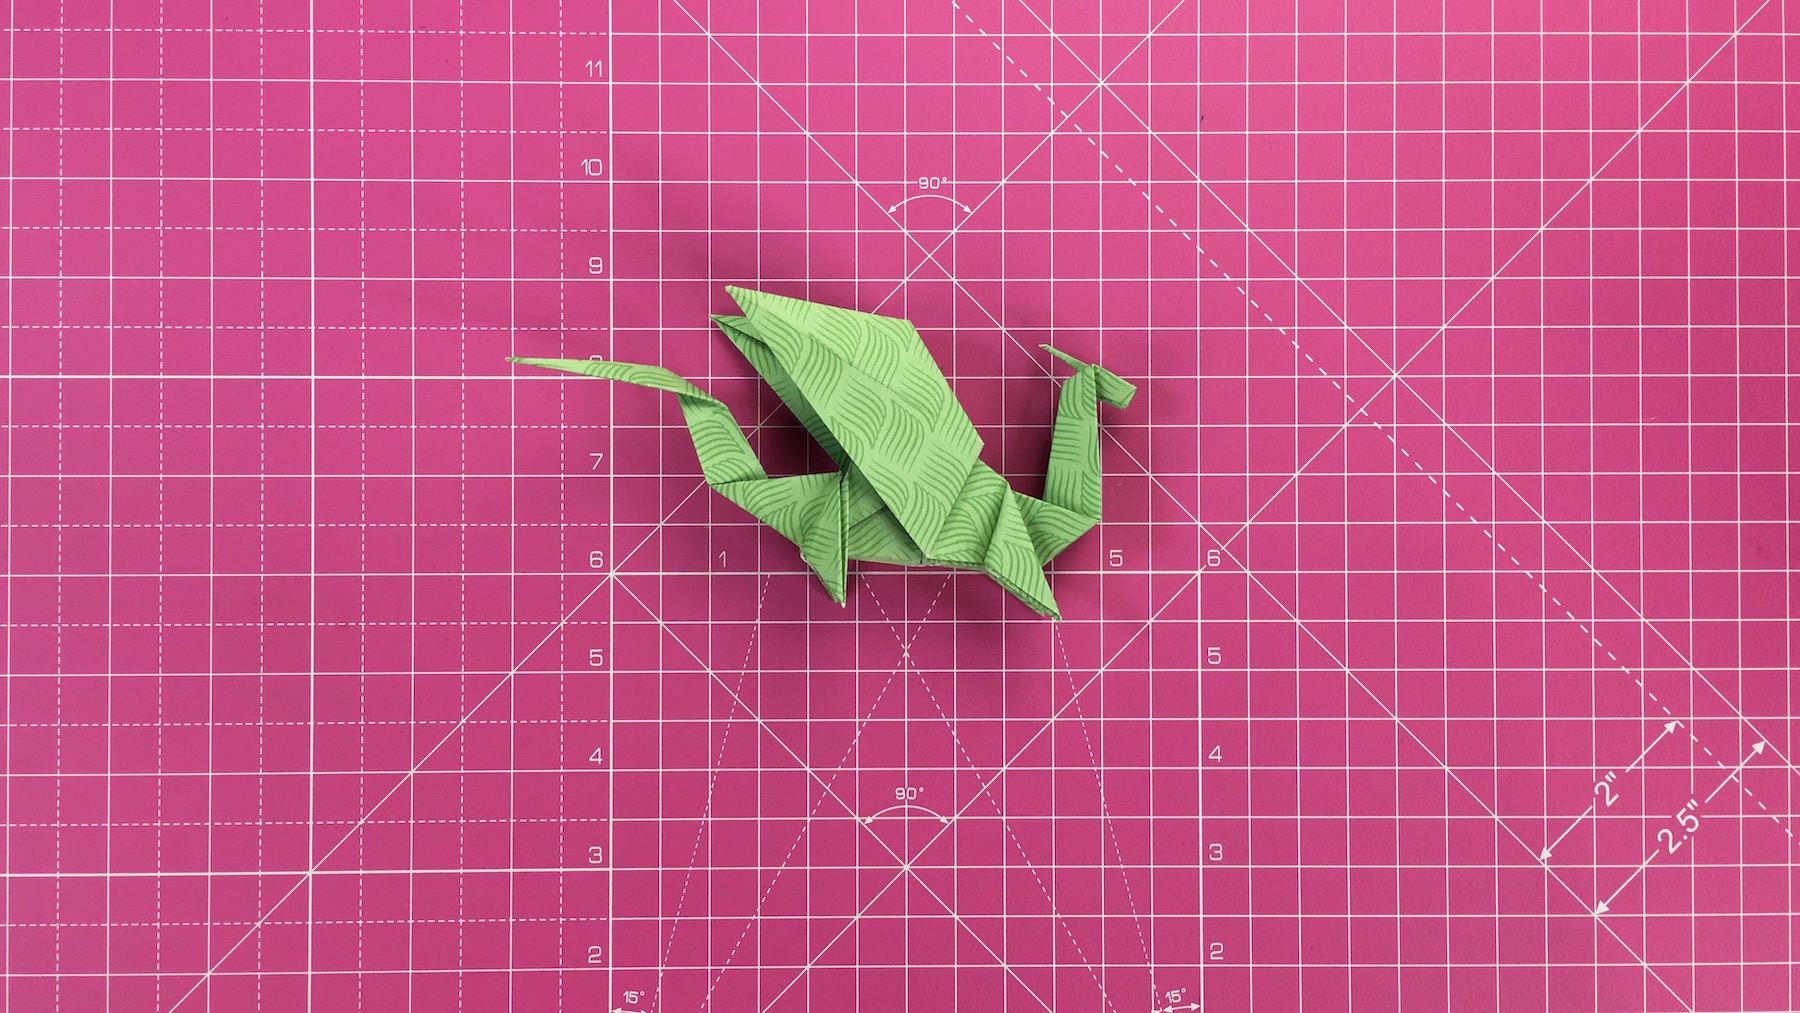 How to make an origami dragon, origami dragon tutorial - step 54a